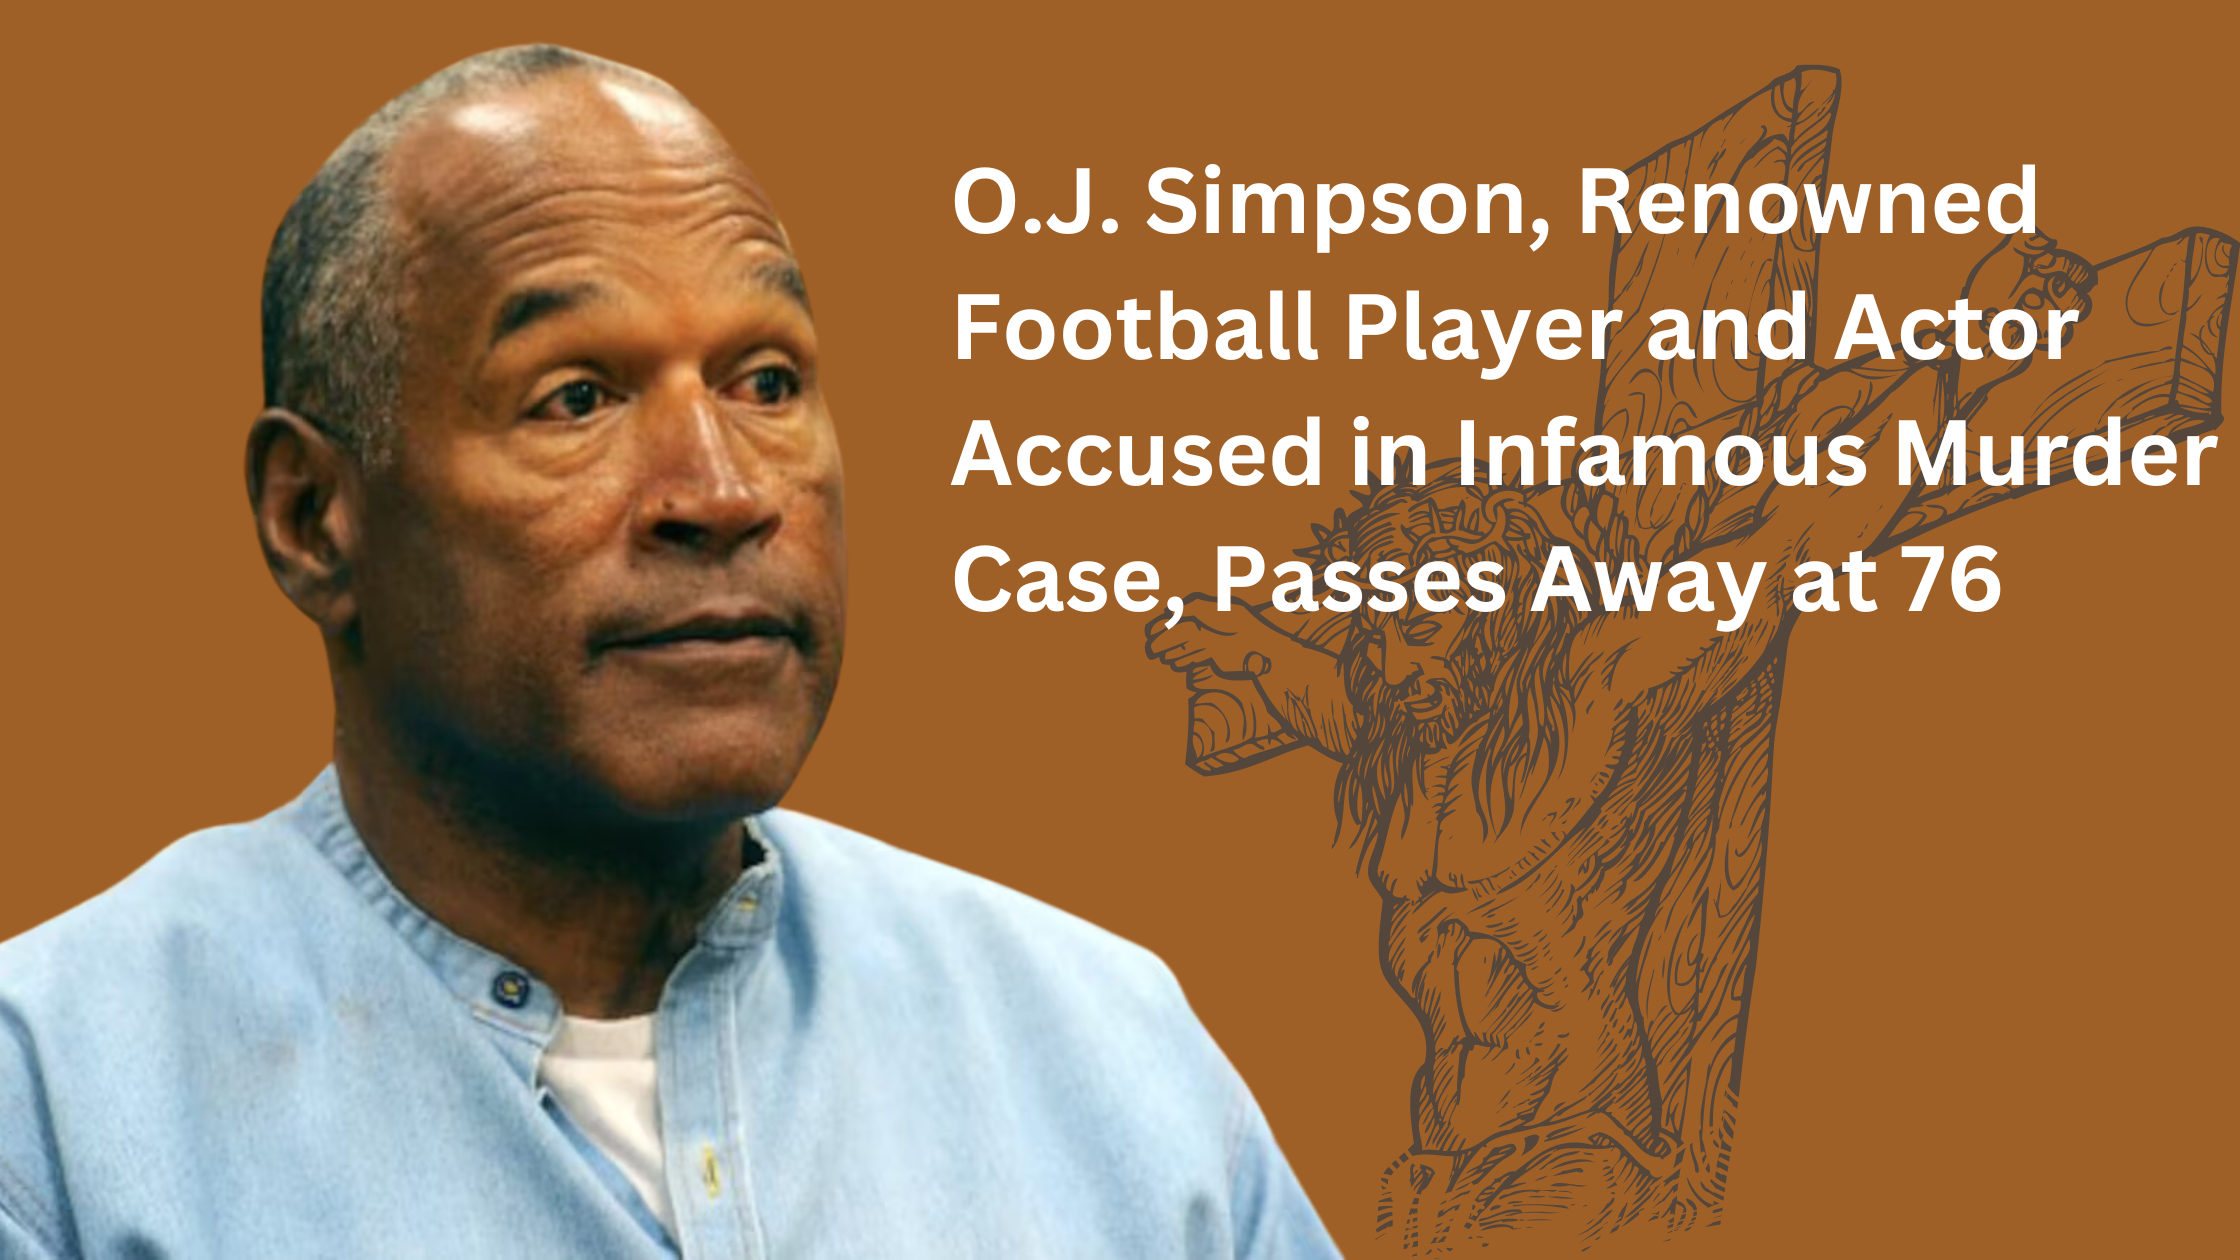 O.J. Simpson, Renowned Football Player and Actor Accused in Infamous Murder Case, Passes Away at 76